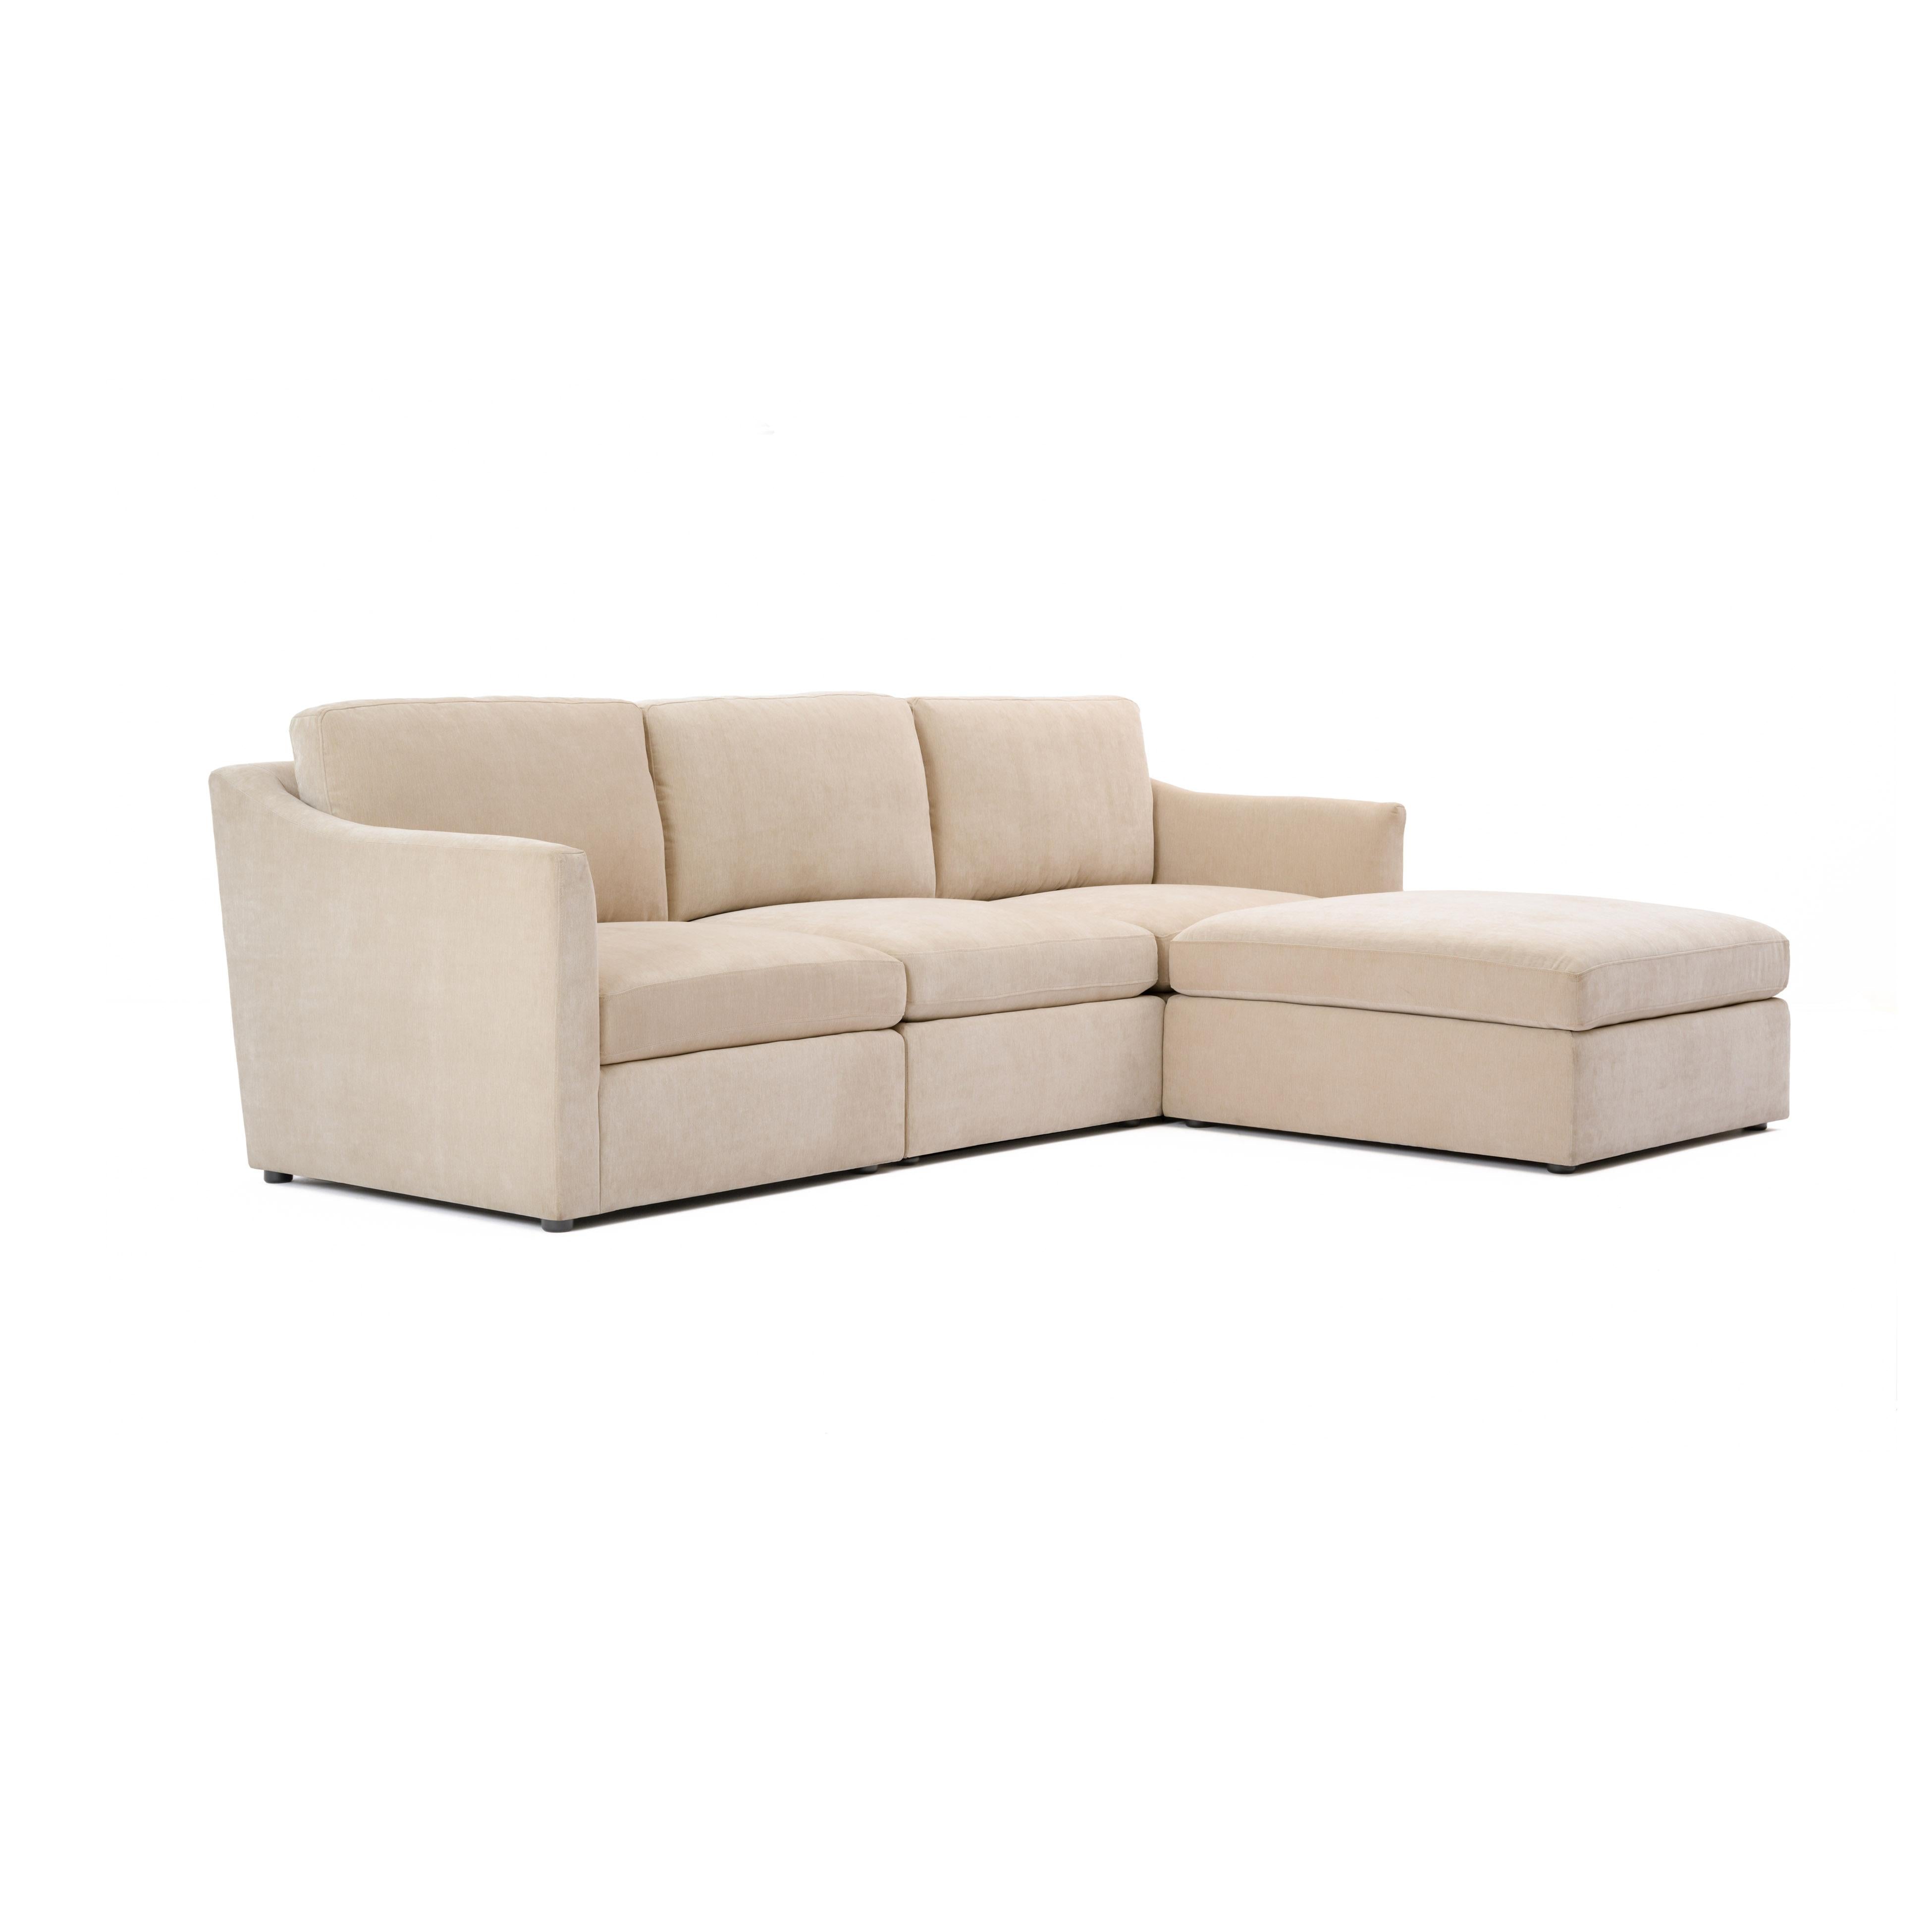 Tov Furniture Sectionals - Aiden Beige Modular Small Chaise Sectional